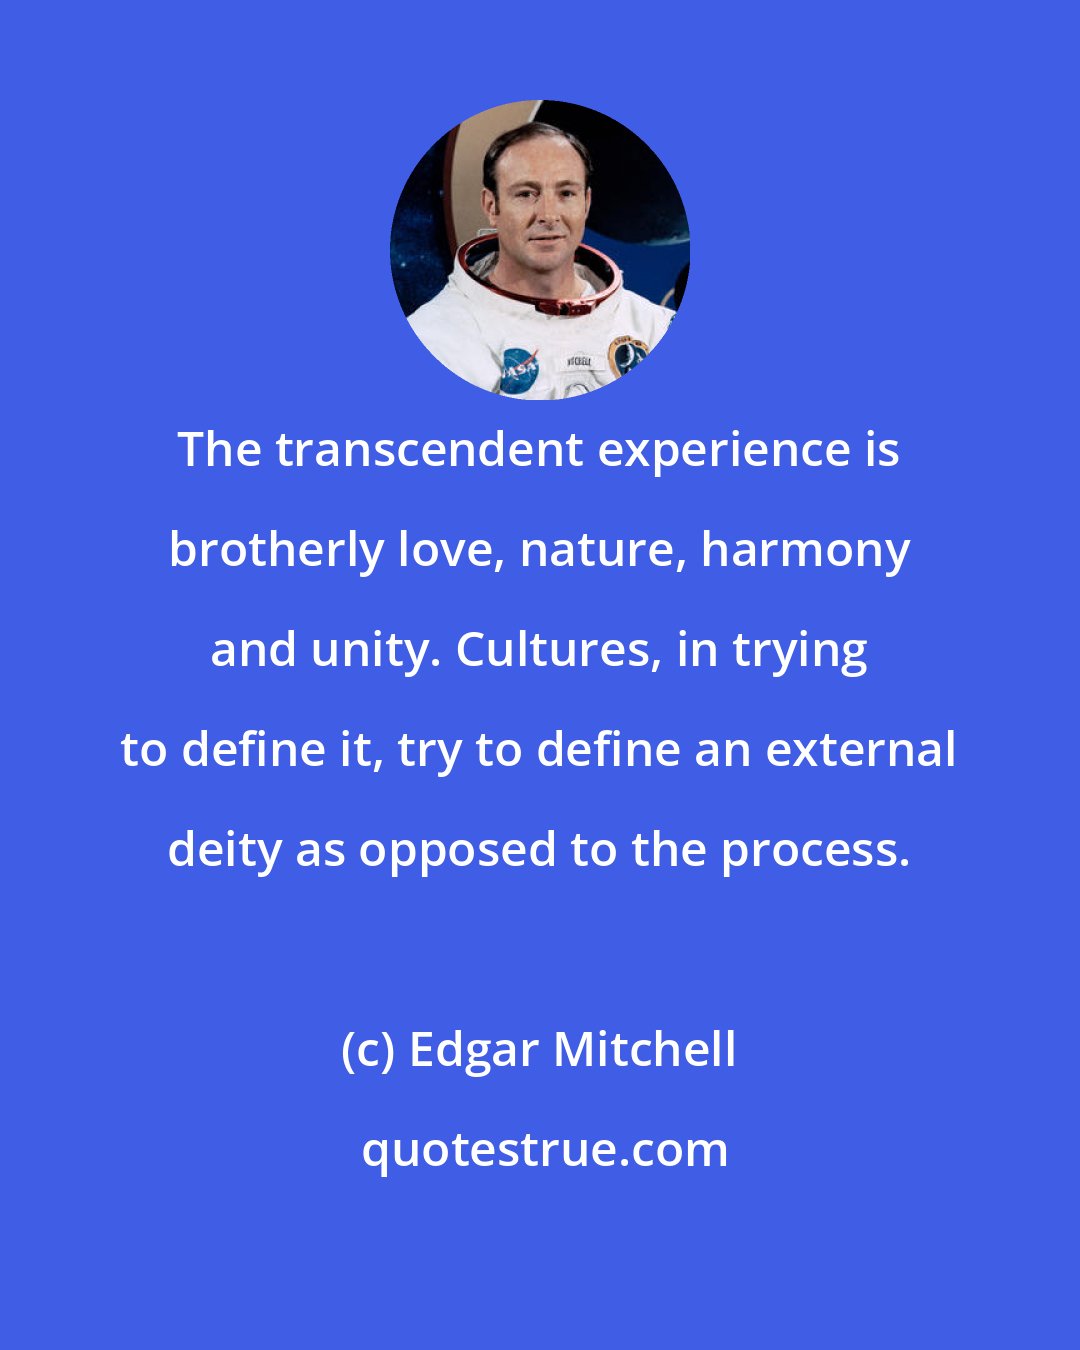 Edgar Mitchell: The transcendent experience is brotherly love, nature, harmony and unity. Cultures, in trying to define it, try to define an external deity as opposed to the process.